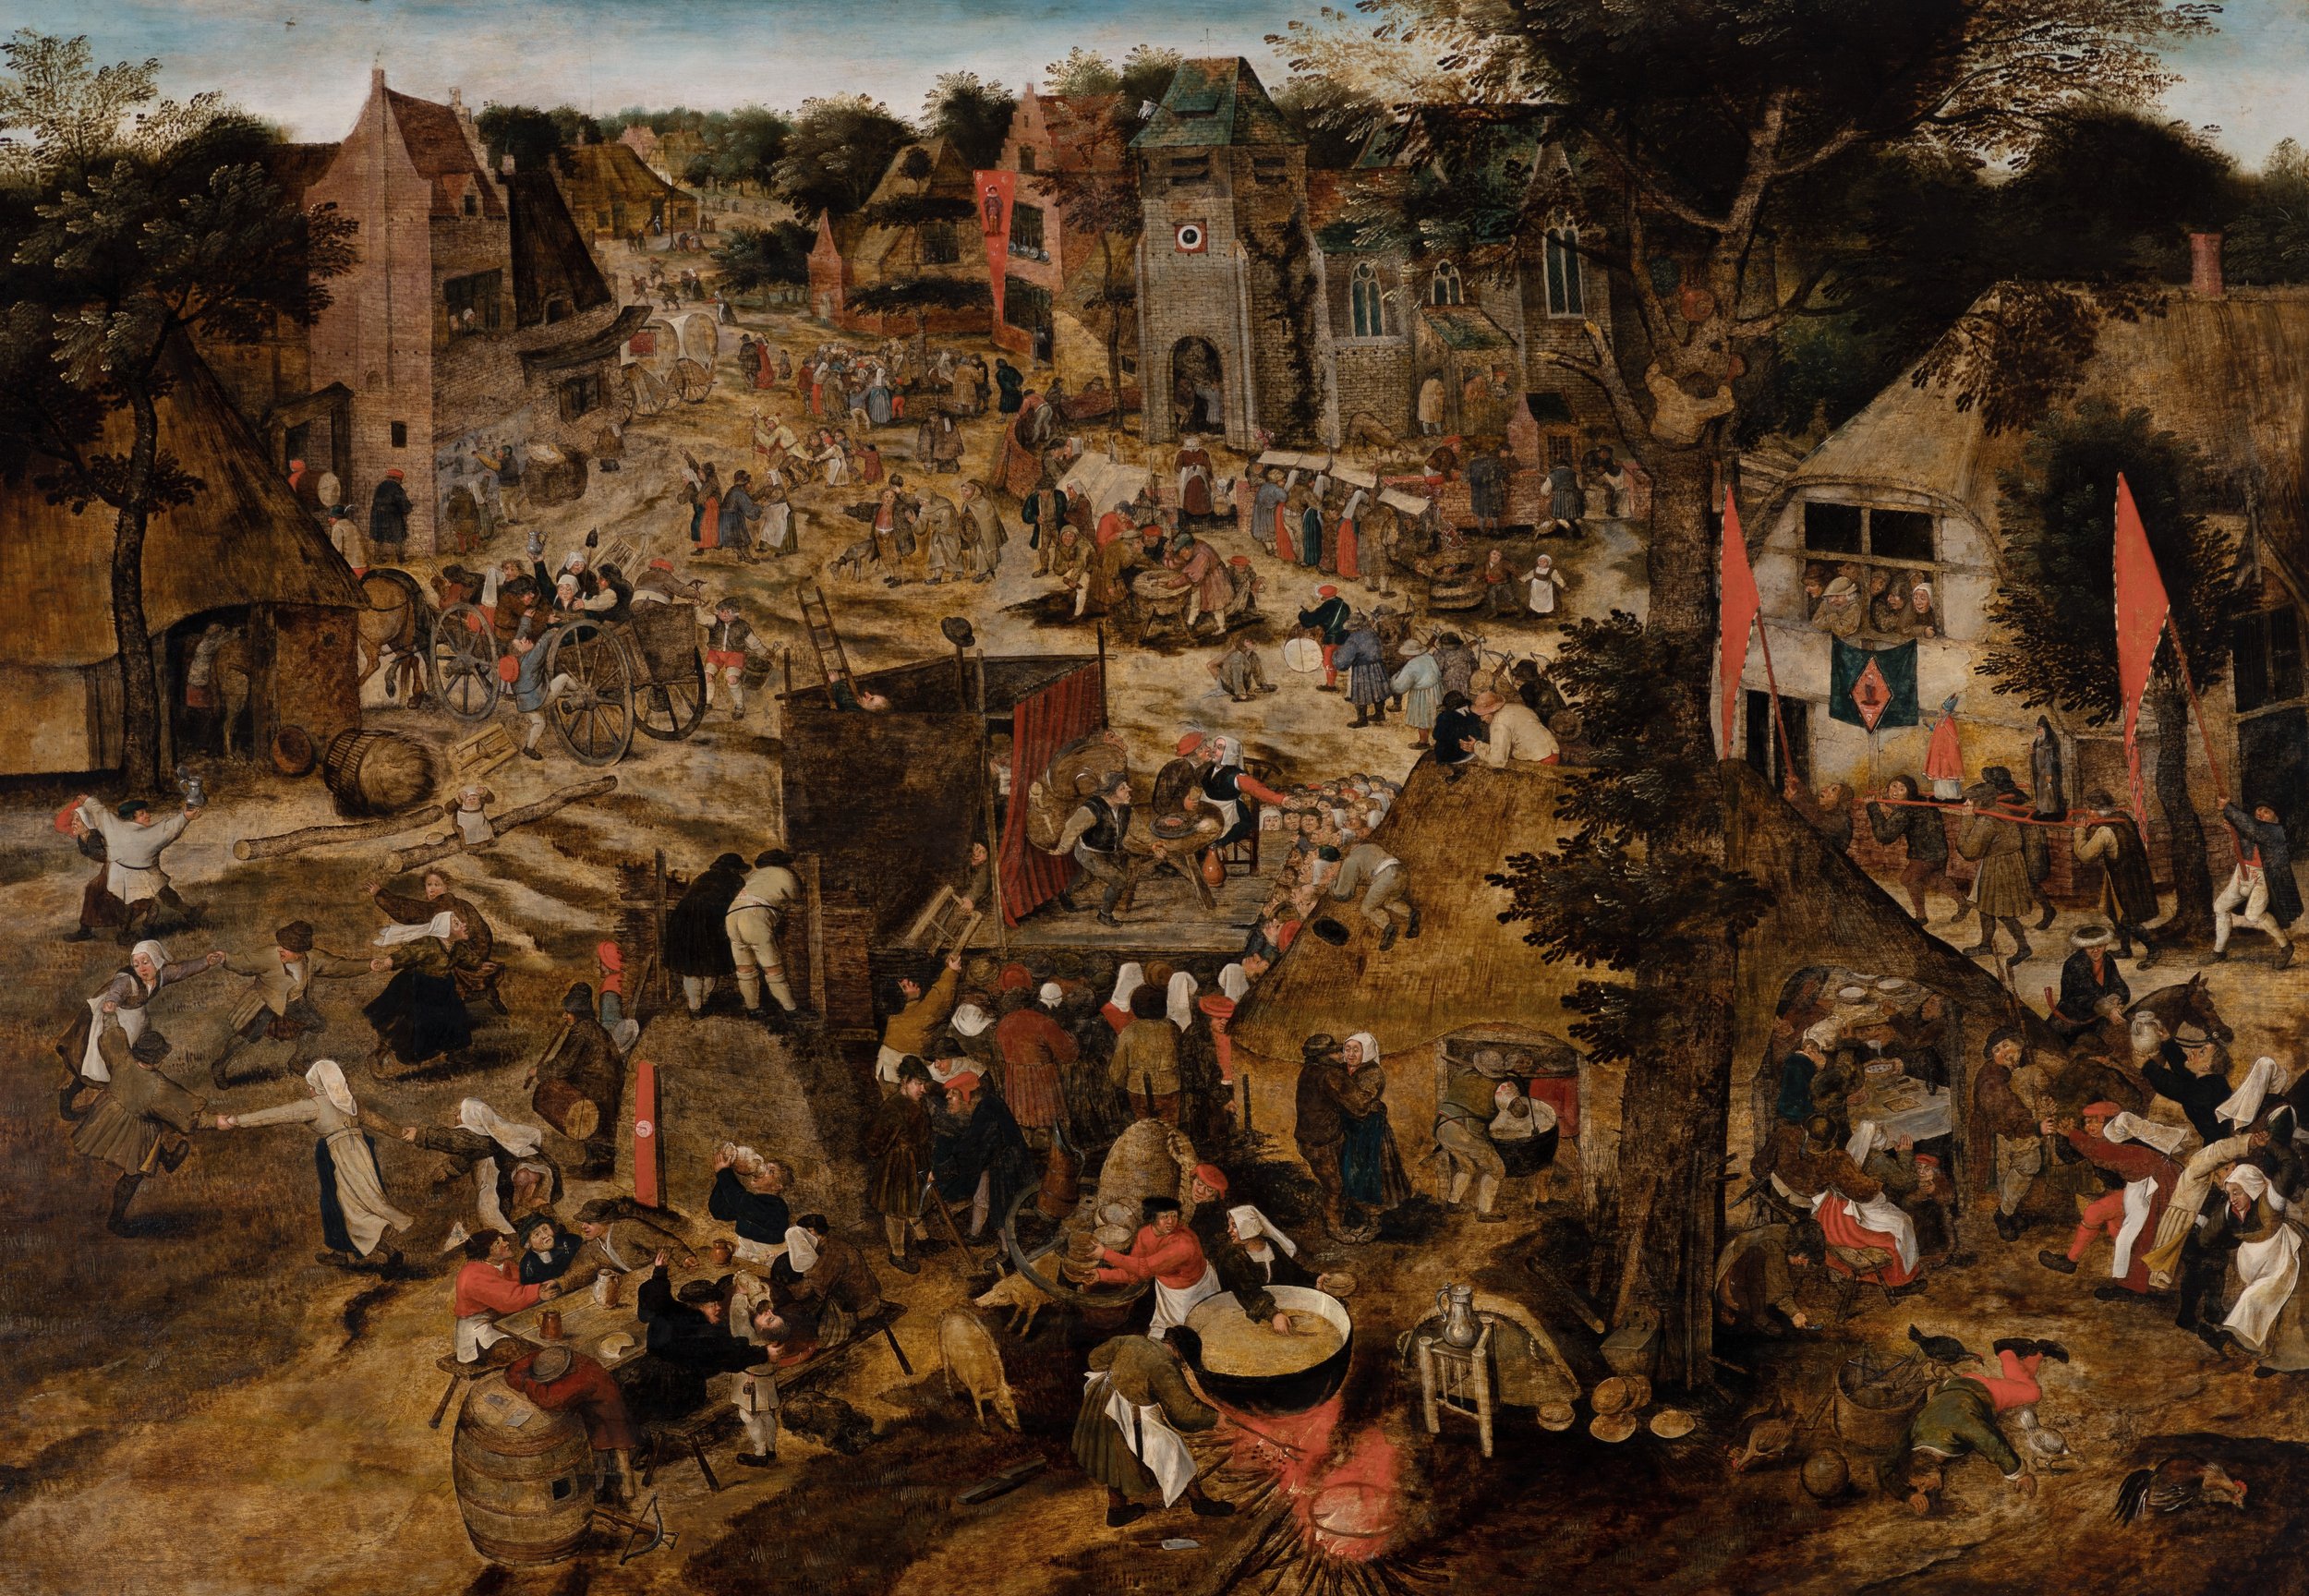 M1961_1 Pieter Brueghel the Younger A Village fair oil on panel [After Treatment] 16-02-2023 040 (2).jpg